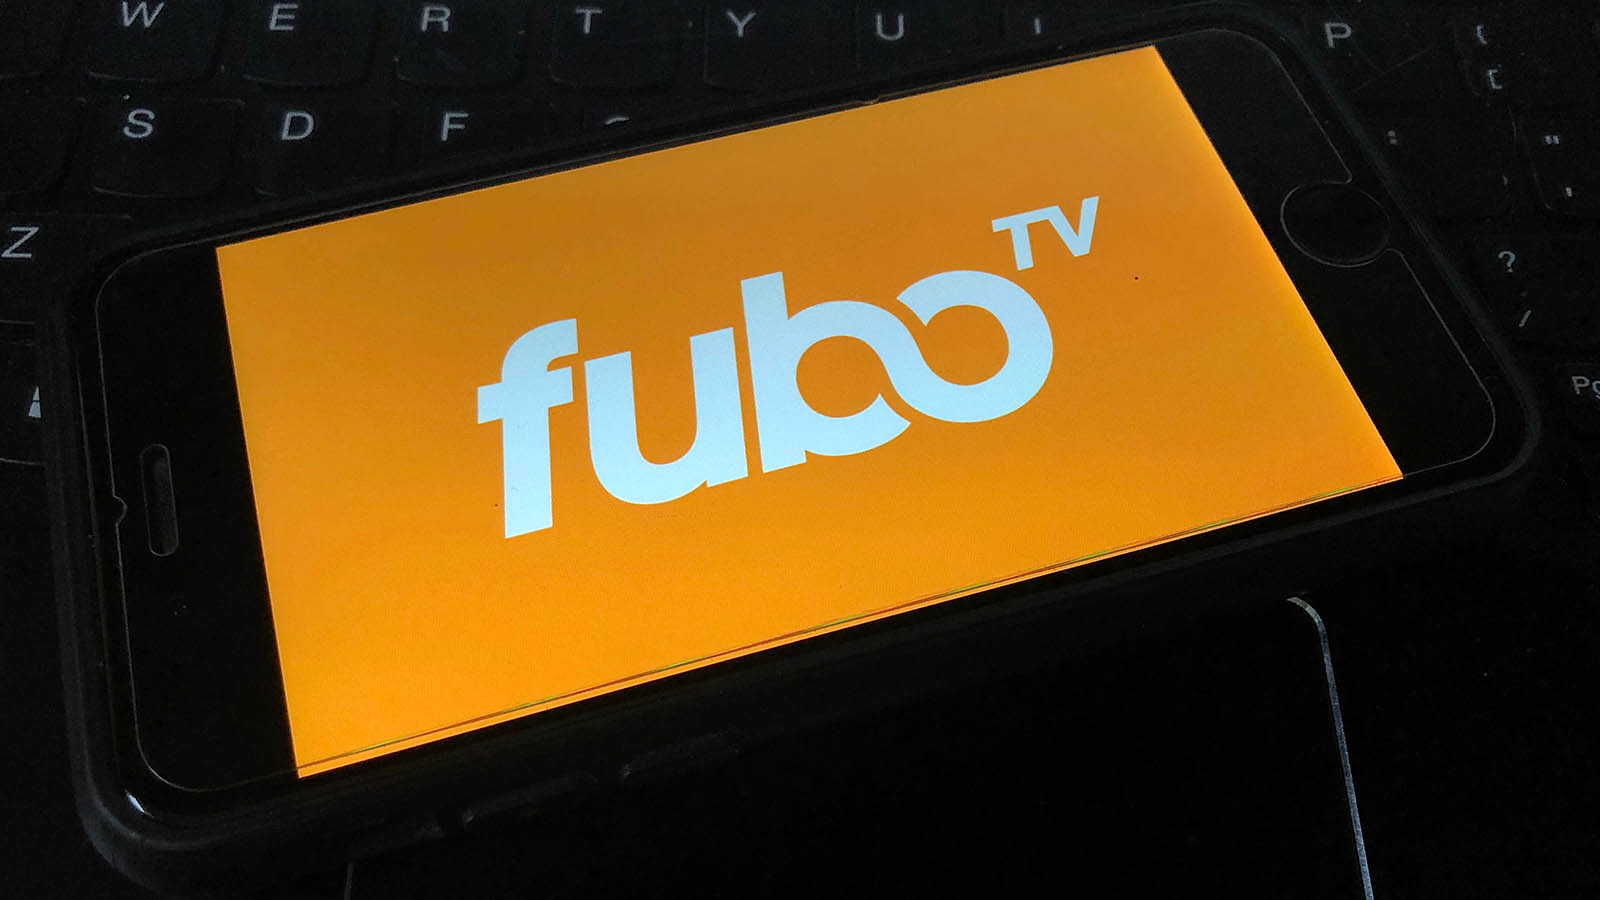 A picture of a FuboTV (FUBO) logo on a smart phone against a computer keyboard.